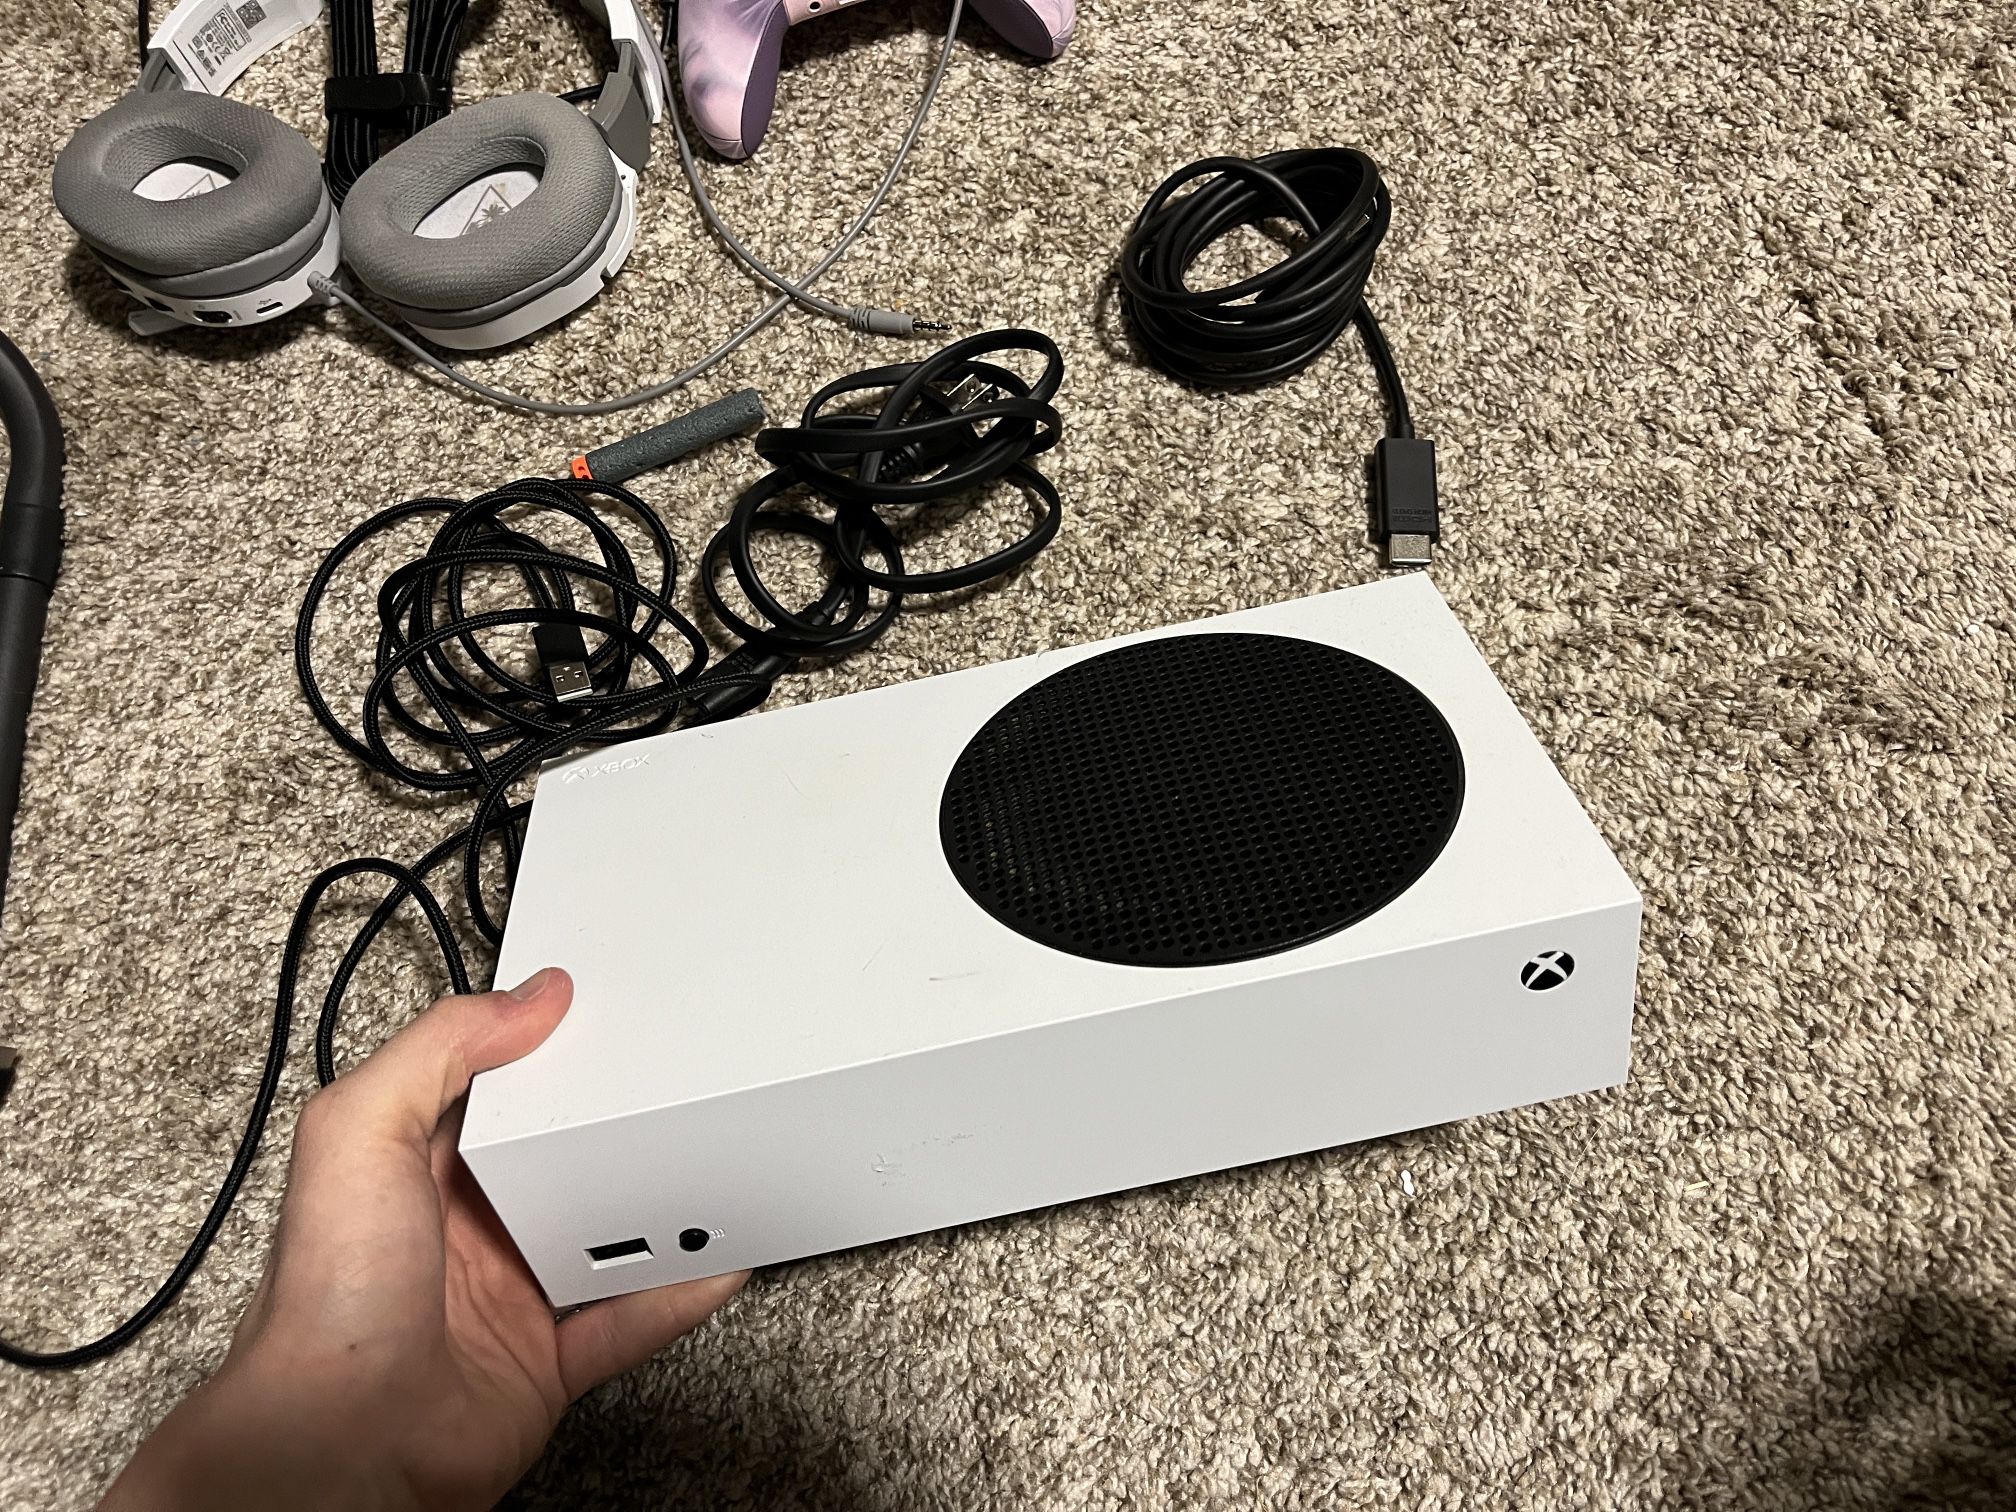 Xbox Series S with all cords